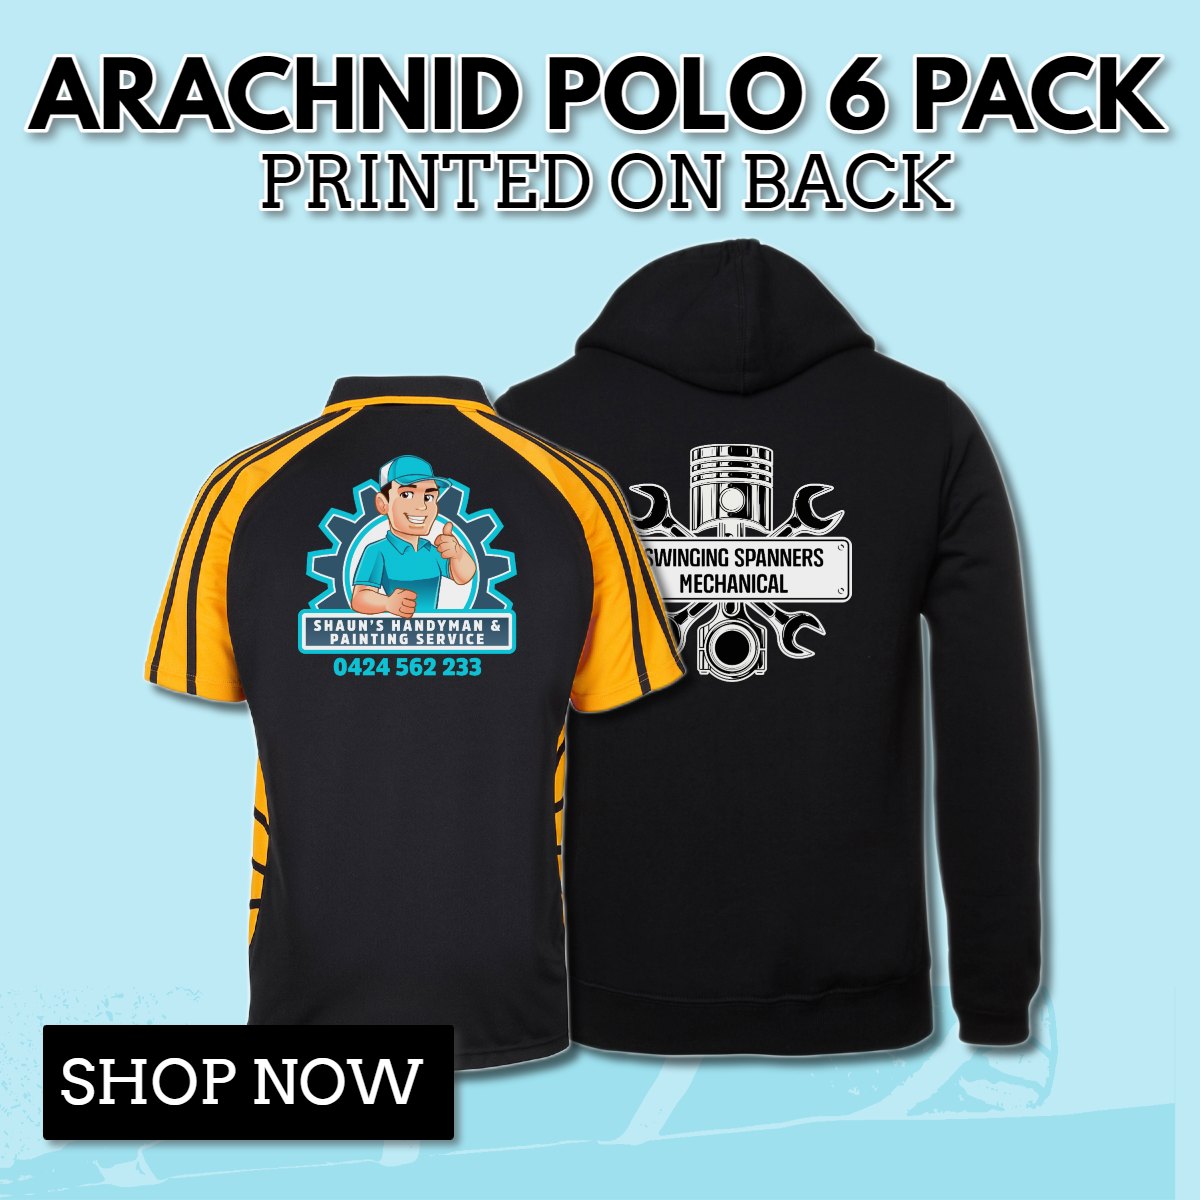 Arachnid Polo 6 Pack - 5 x 7APS - 1 x 3POH With Vinyl Print On Back